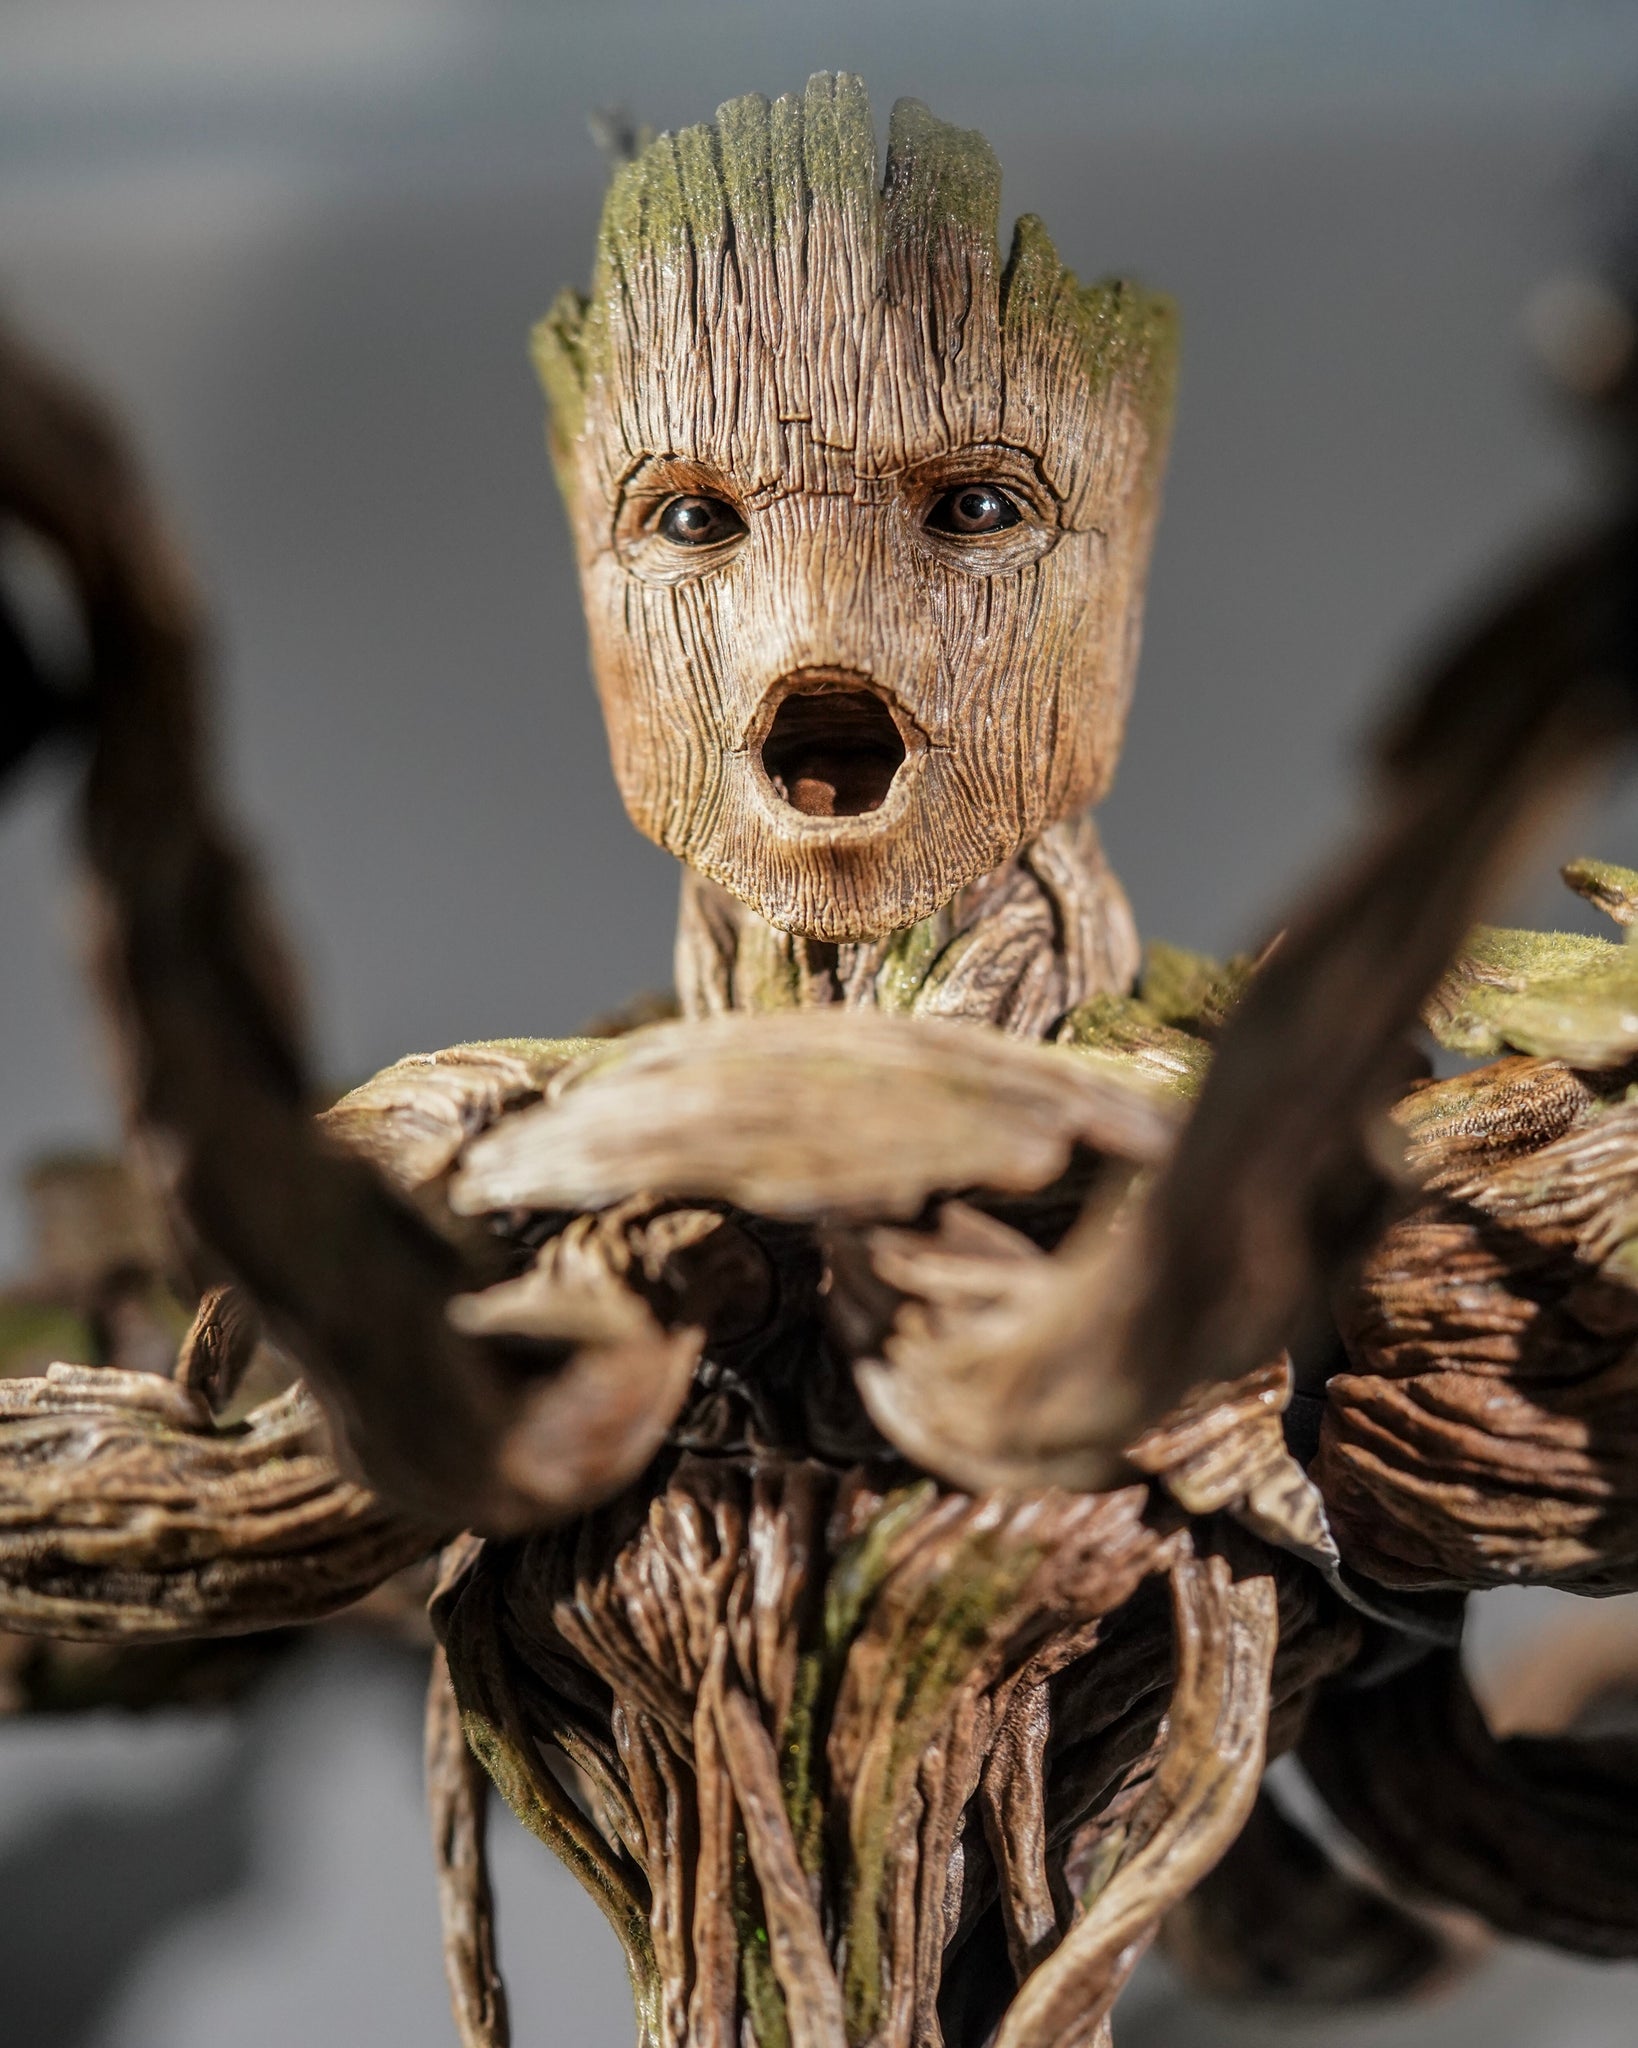 Groot (deluxe) Movie Masterpiece MMS707, Hot Toys